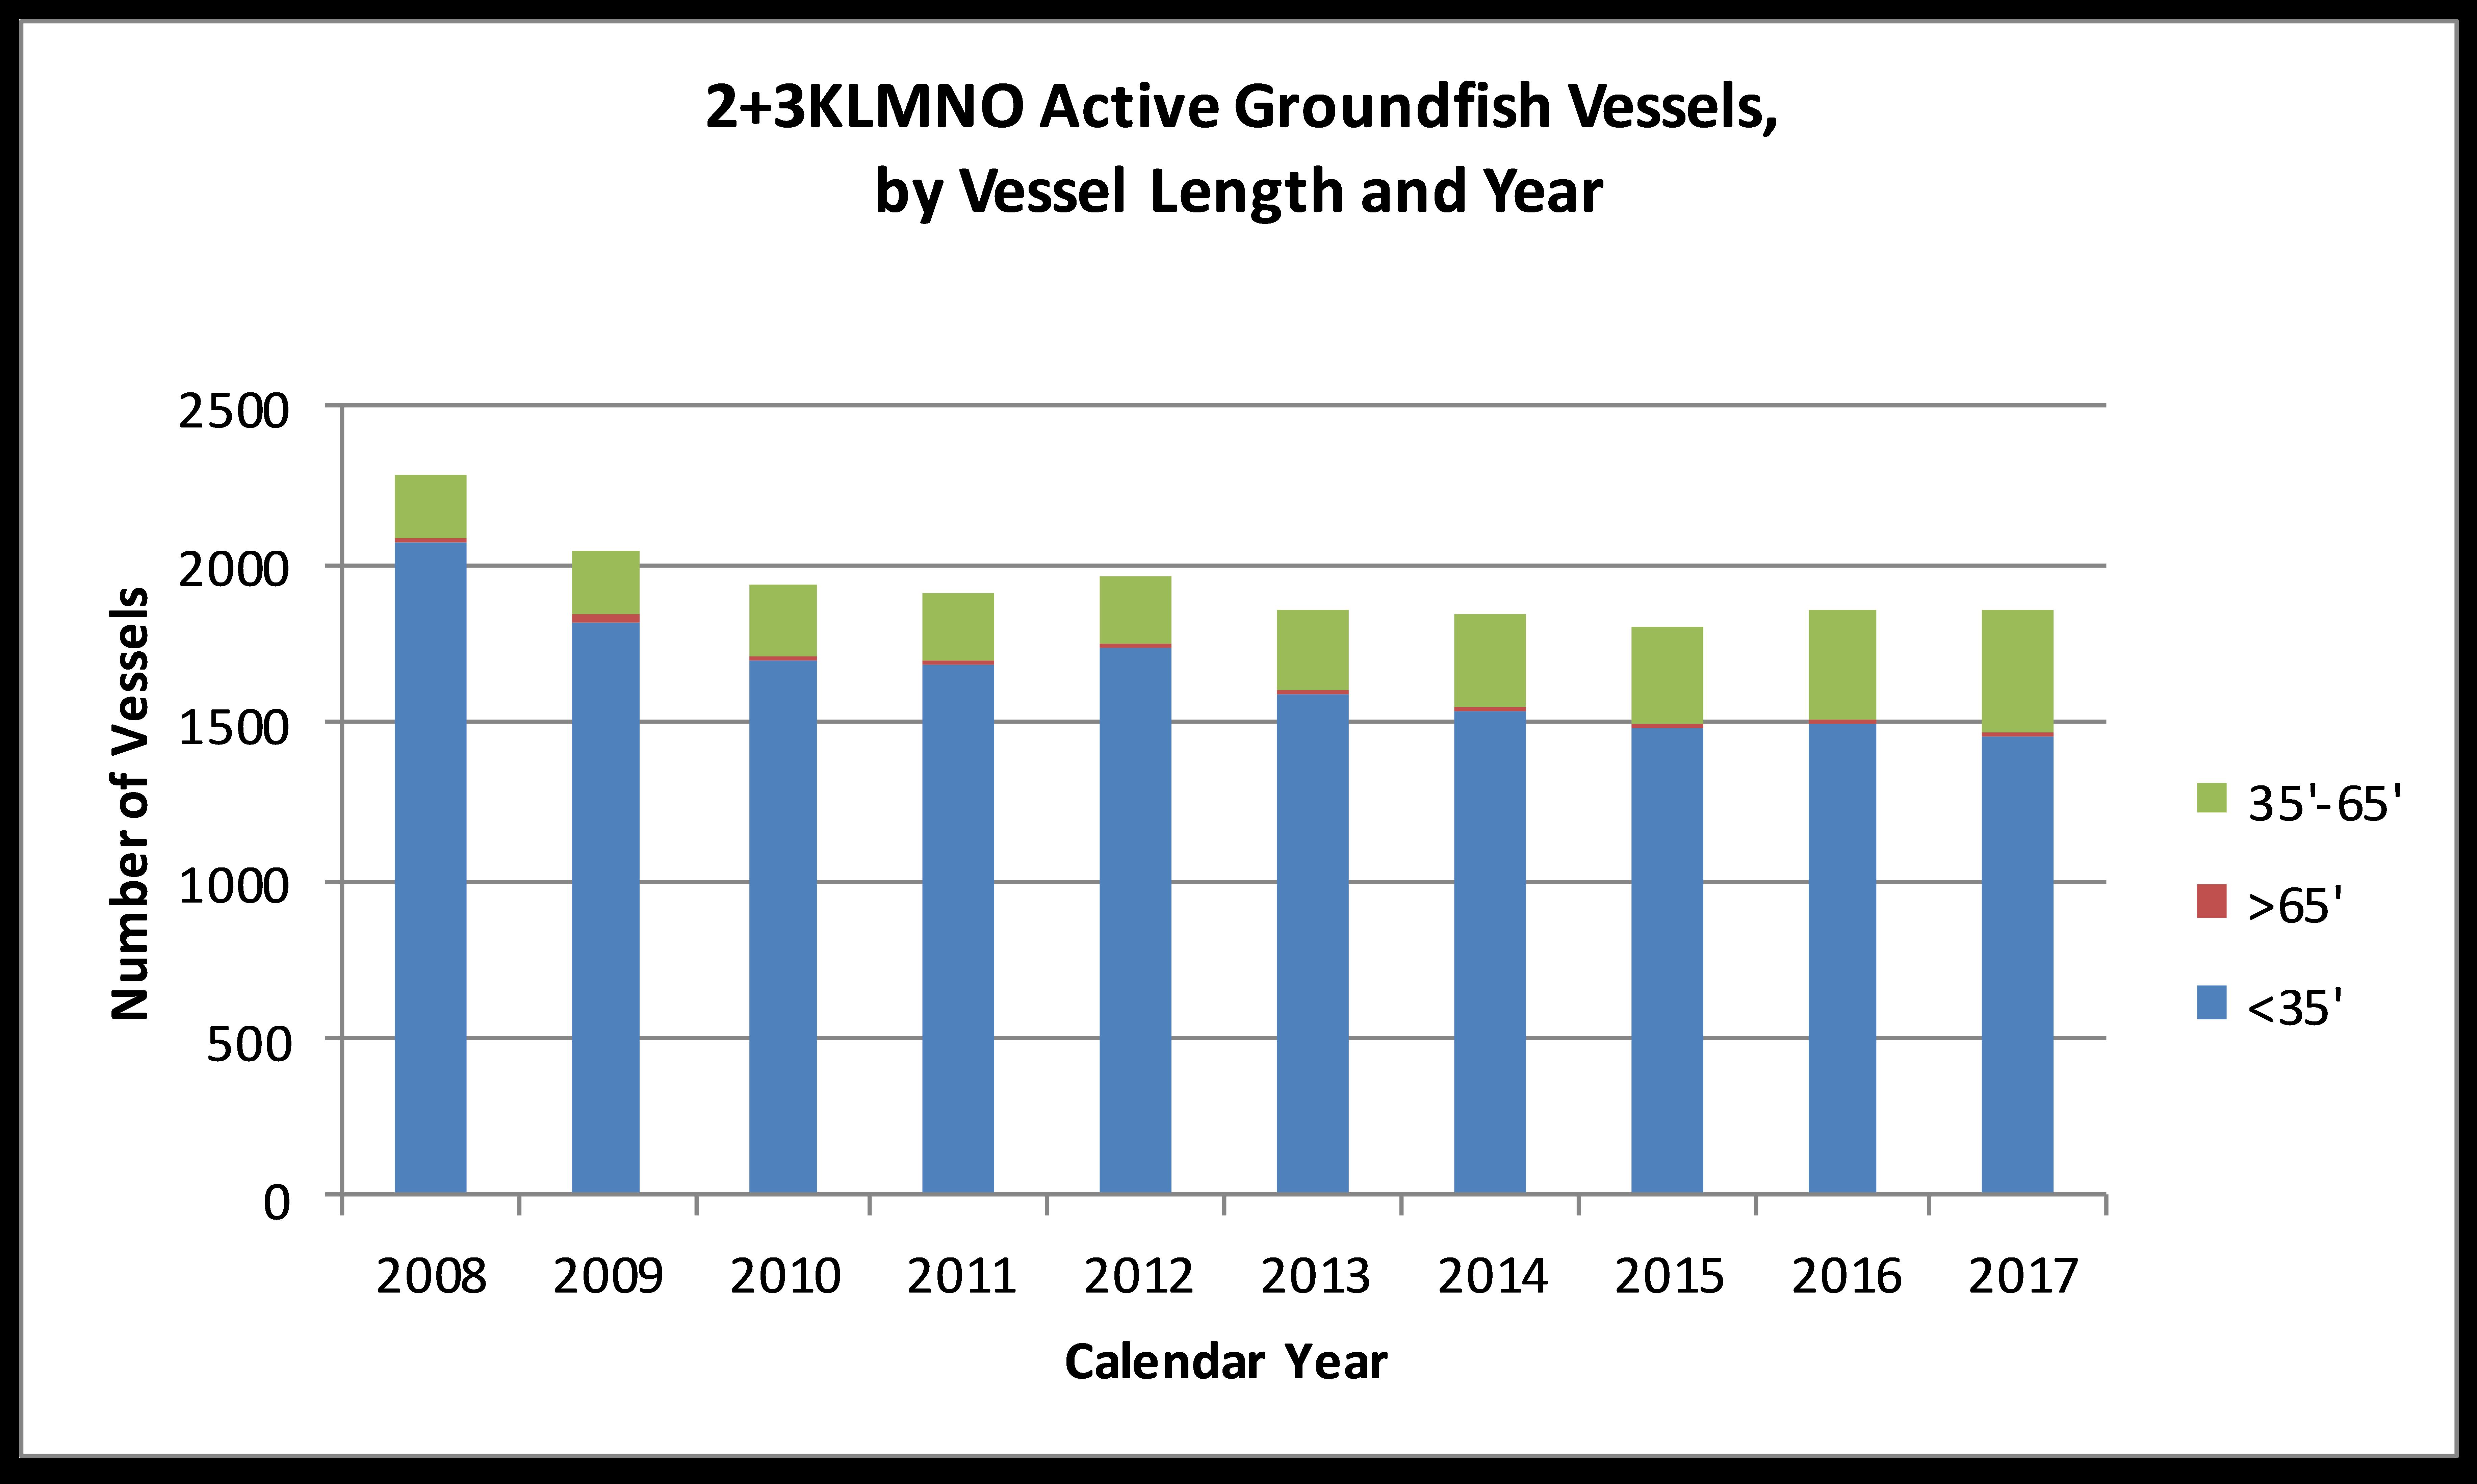 Number of active vessels in 2+3KLMNO groundfish fishery by vessel length (2008-2017).